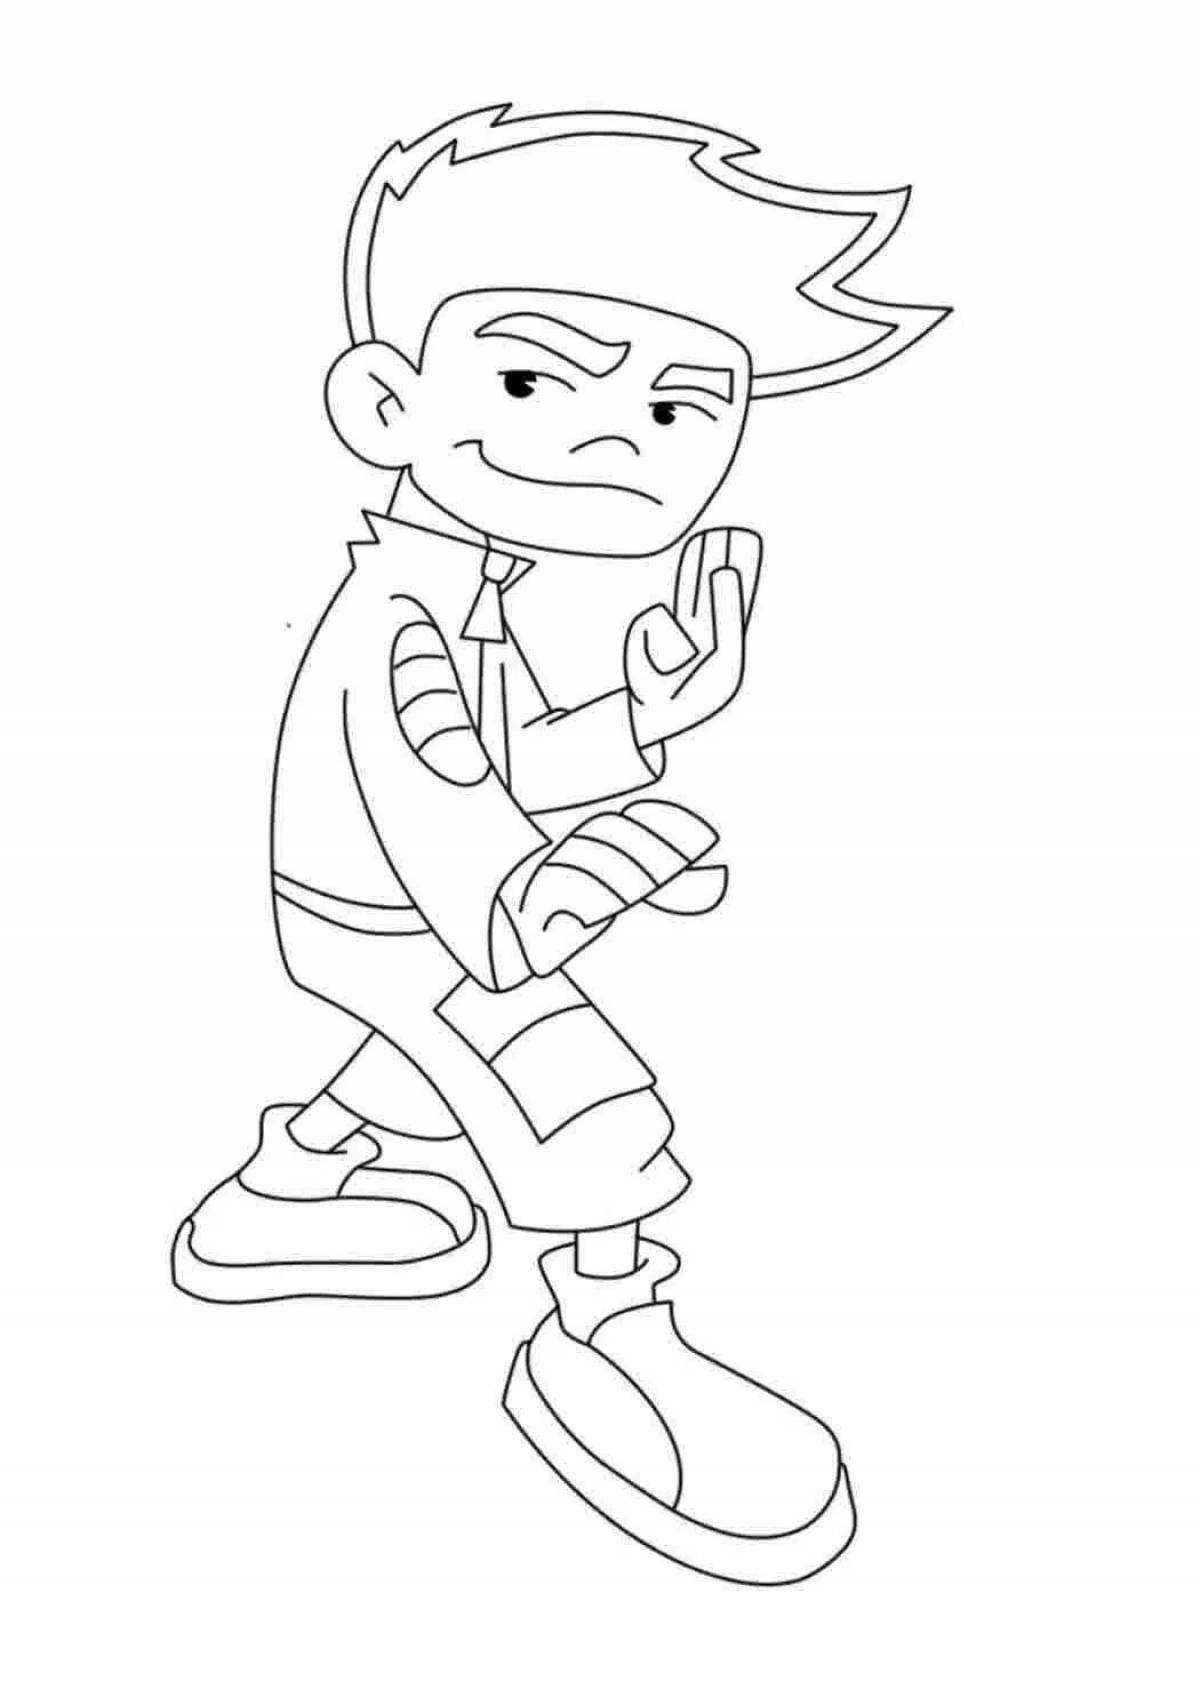 Colorful american dragon coloring page